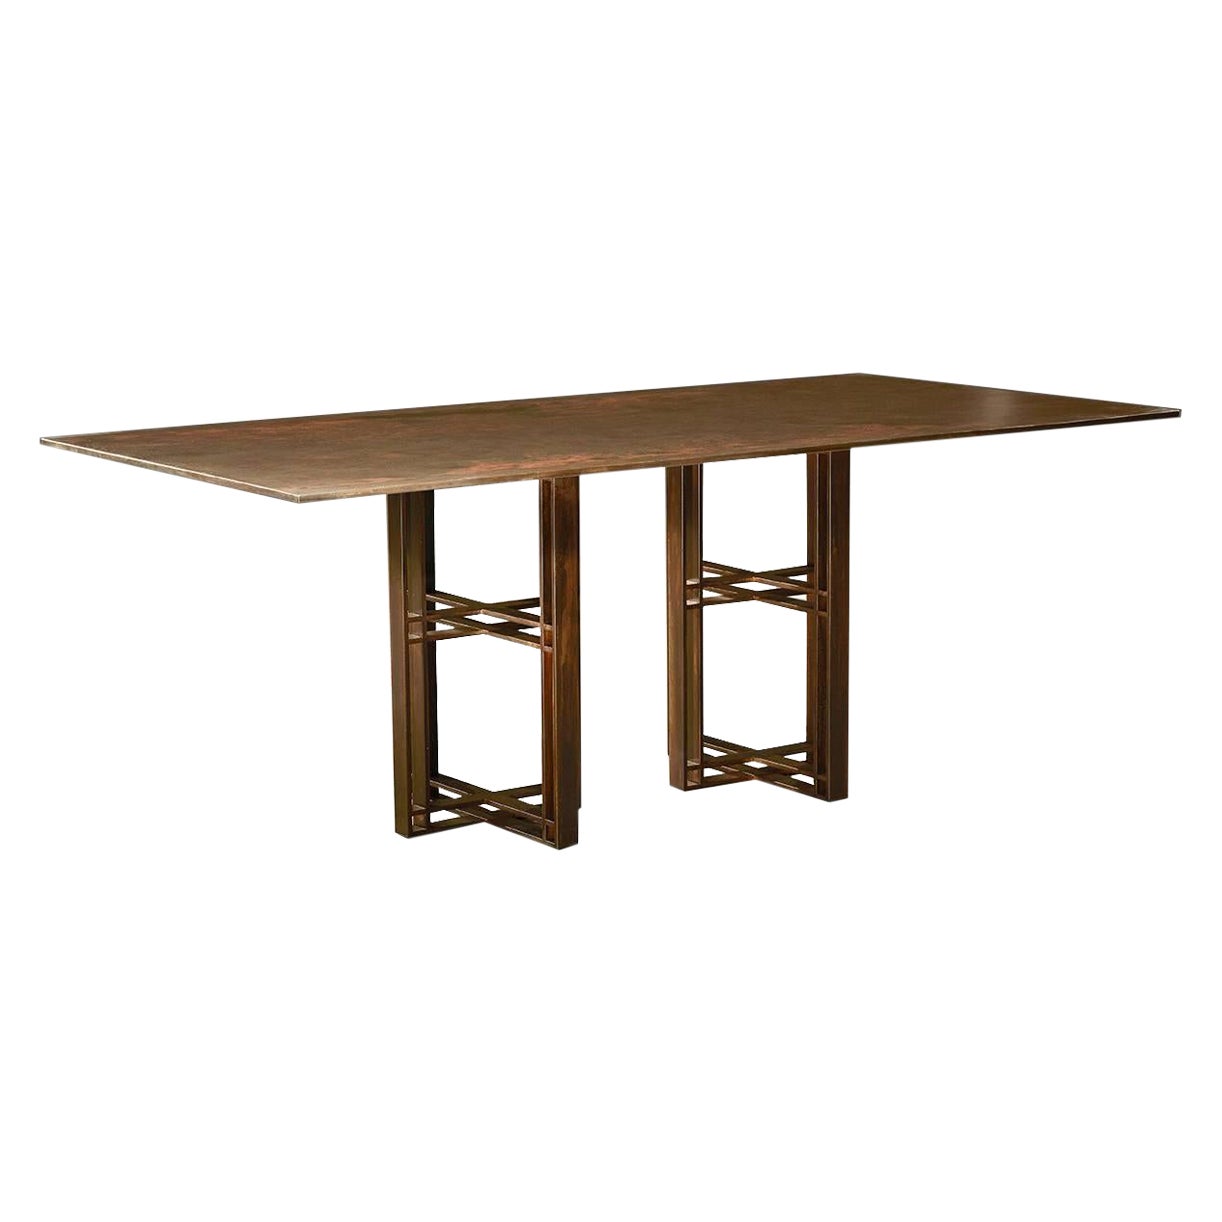 Richy Almond Dining Room Tables